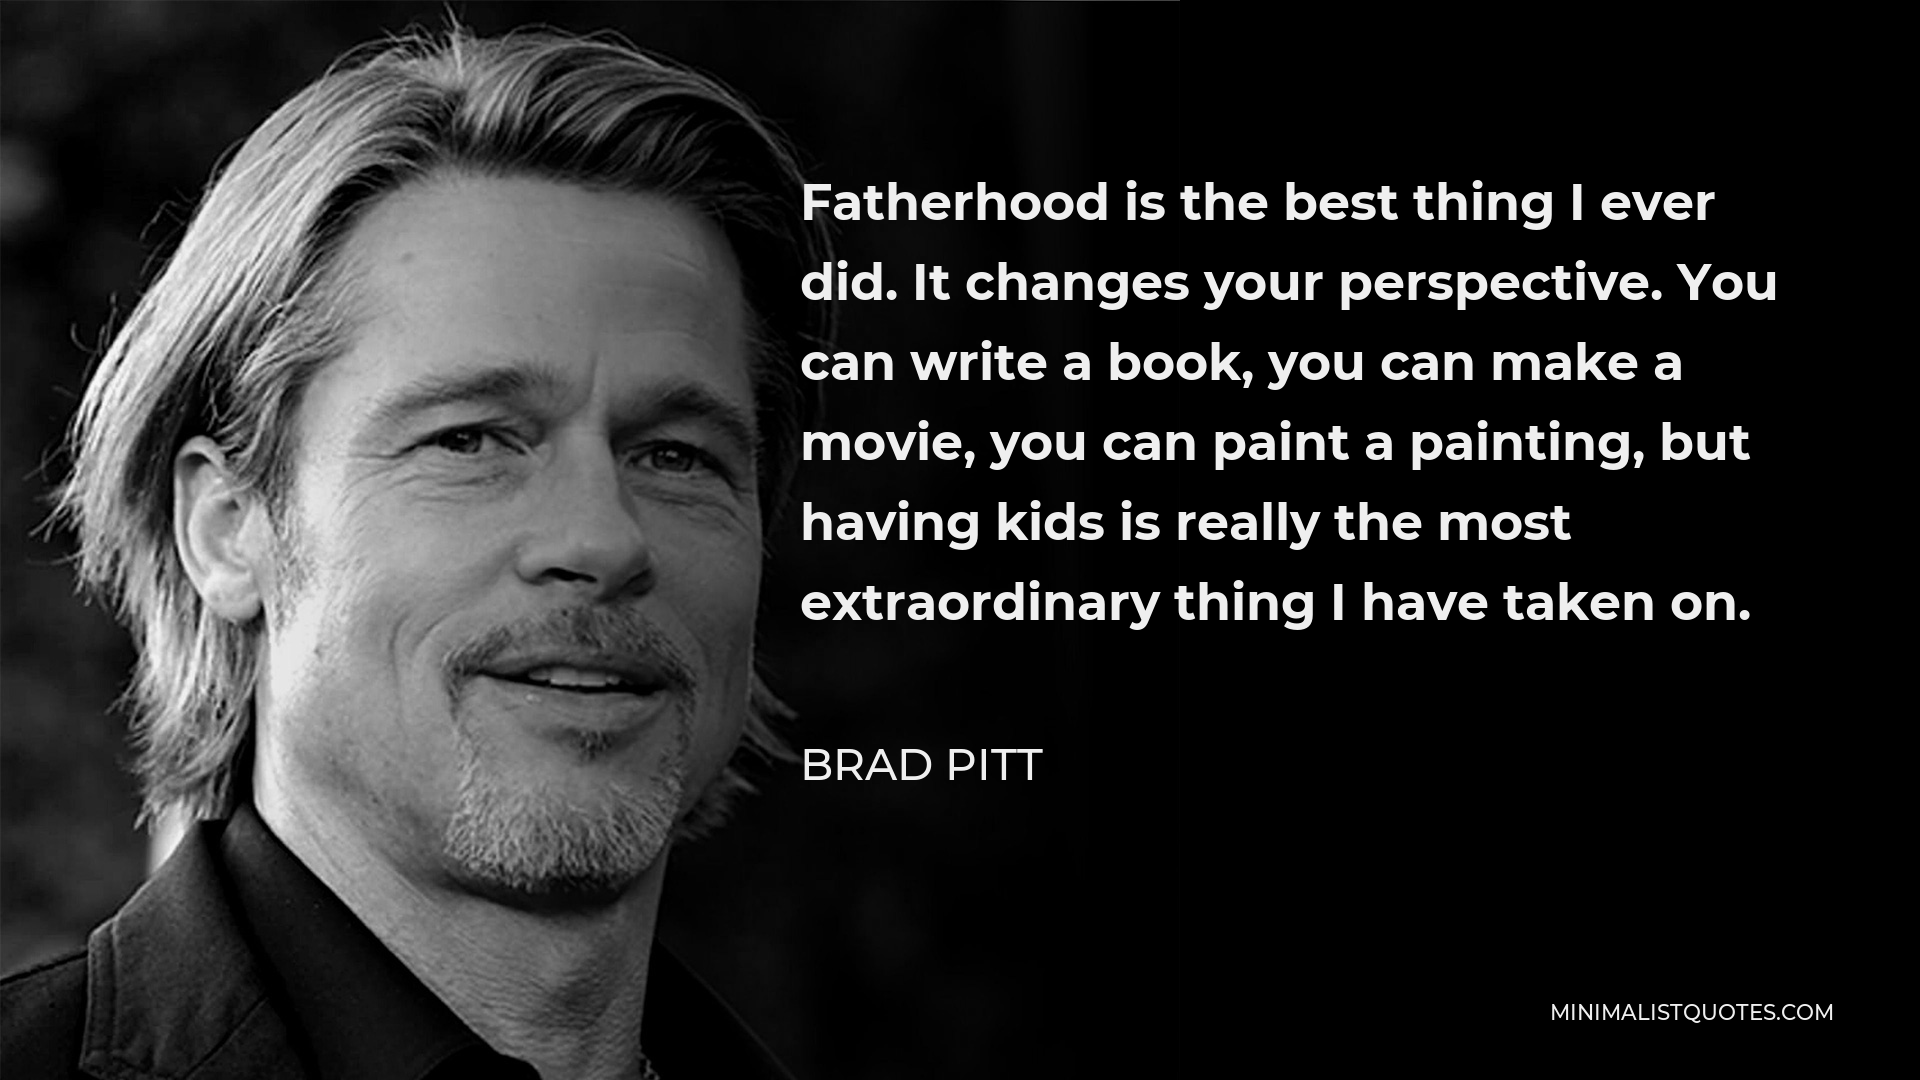 Brad Pitt Quote - Fatherhood is the best thing I ever did. It changes your perspective. You can write a book, you can make a movie, you can paint a painting, but having kids is really the most extraordinary thing I have taken on.